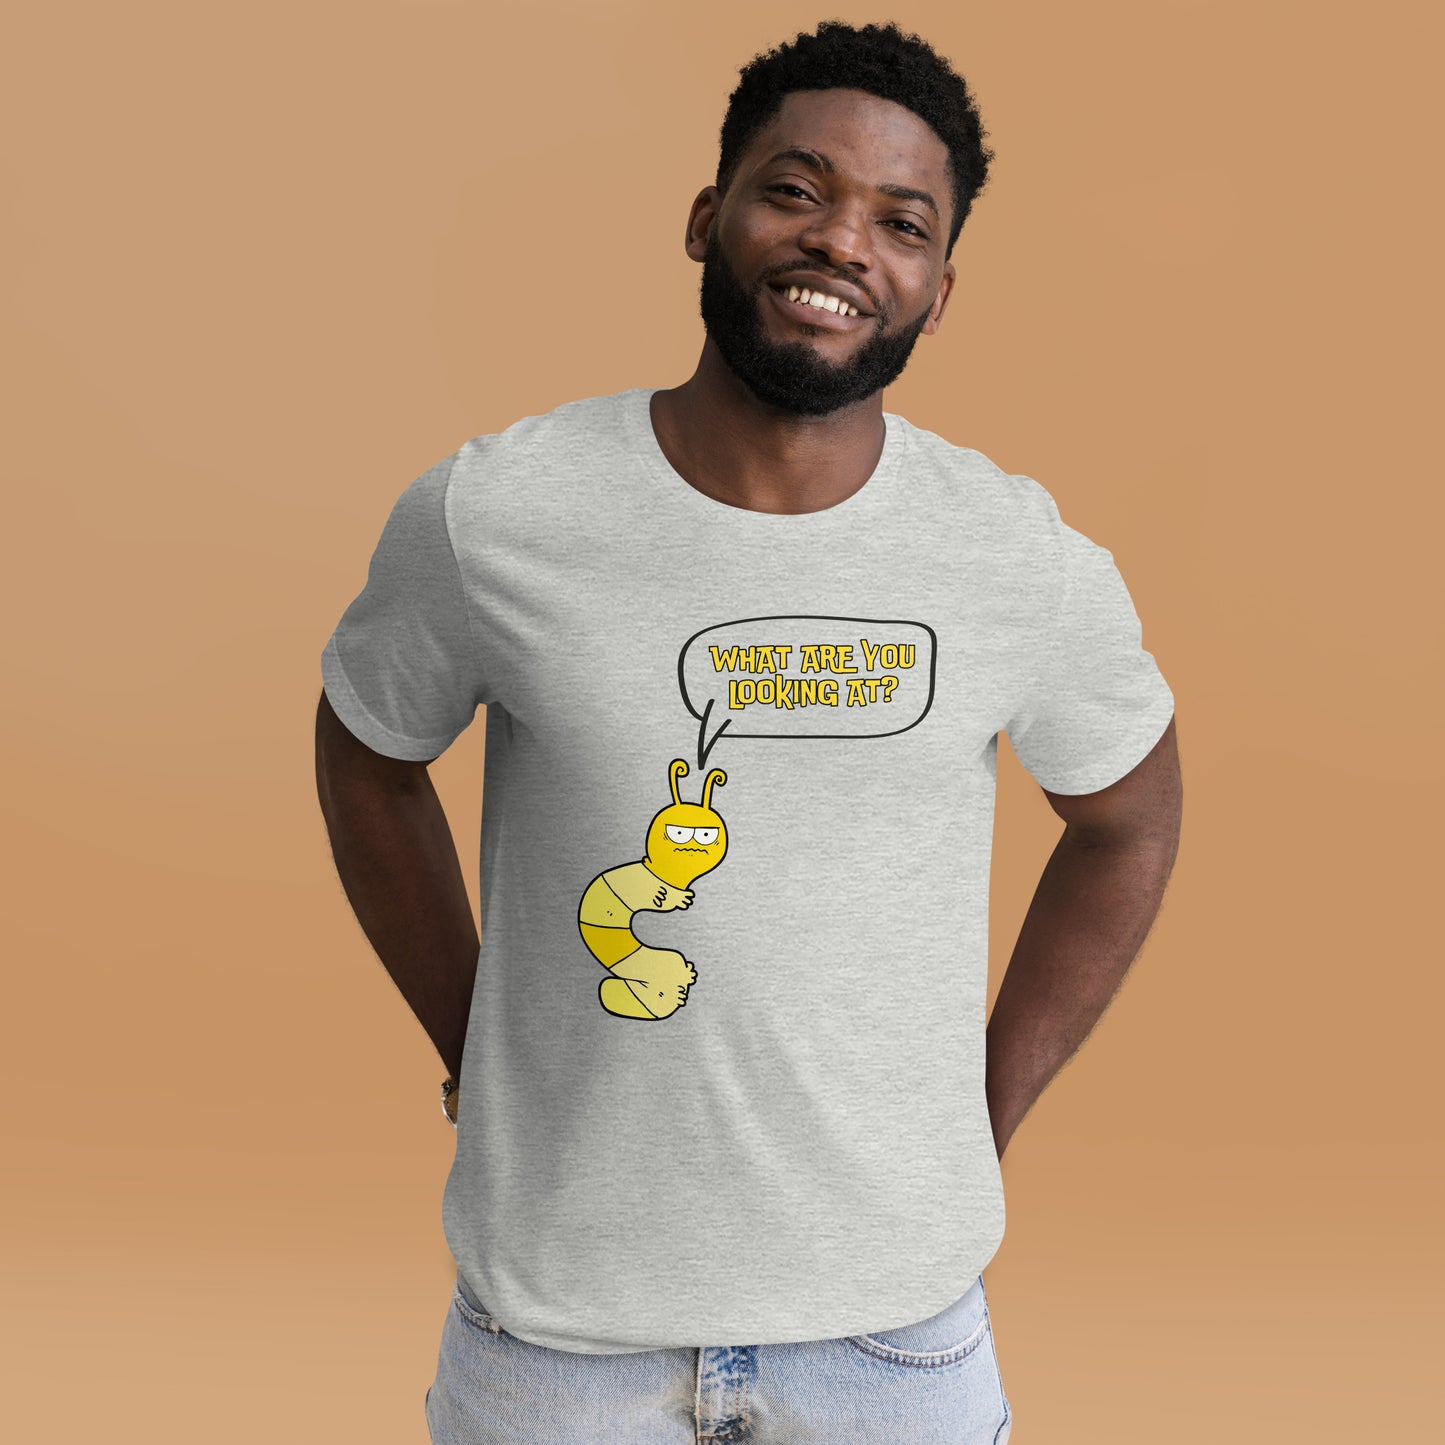 T-Shirt with Grumpy Caterpillar "What Are You Looking At?"